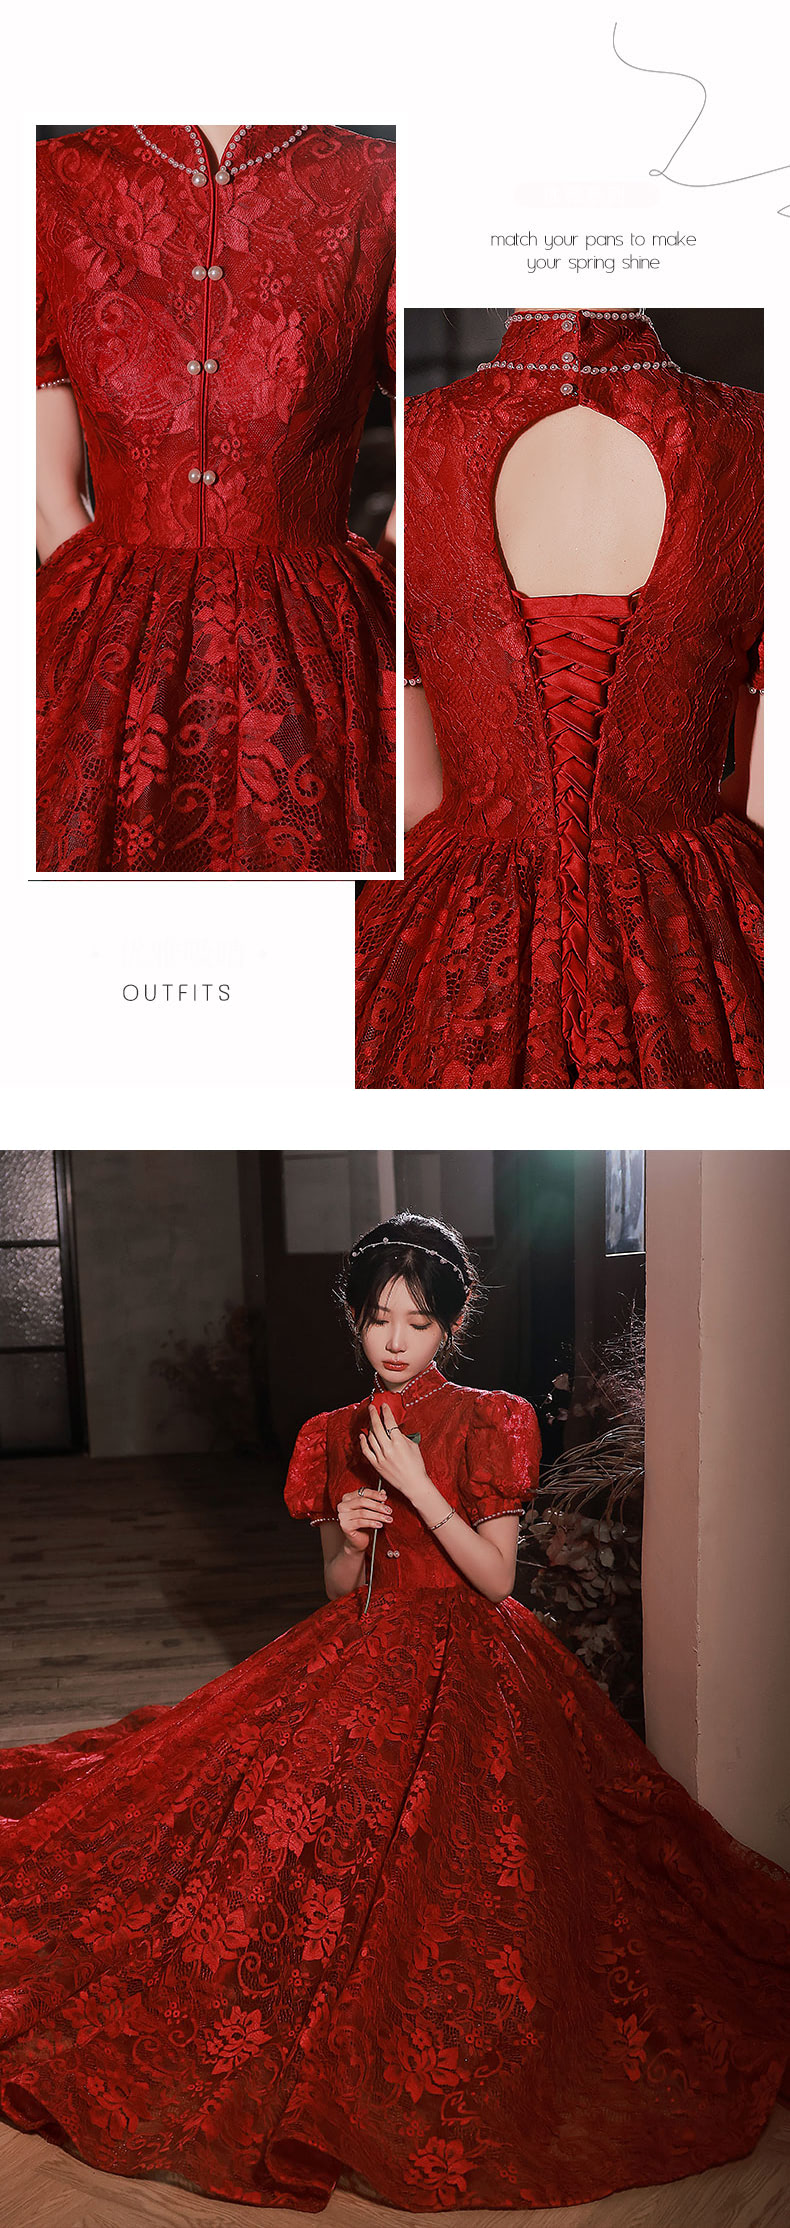 Aesthetic-Embroidered-Red-Prom-Dress-for-Wedding-Banquet-Party10.jpg